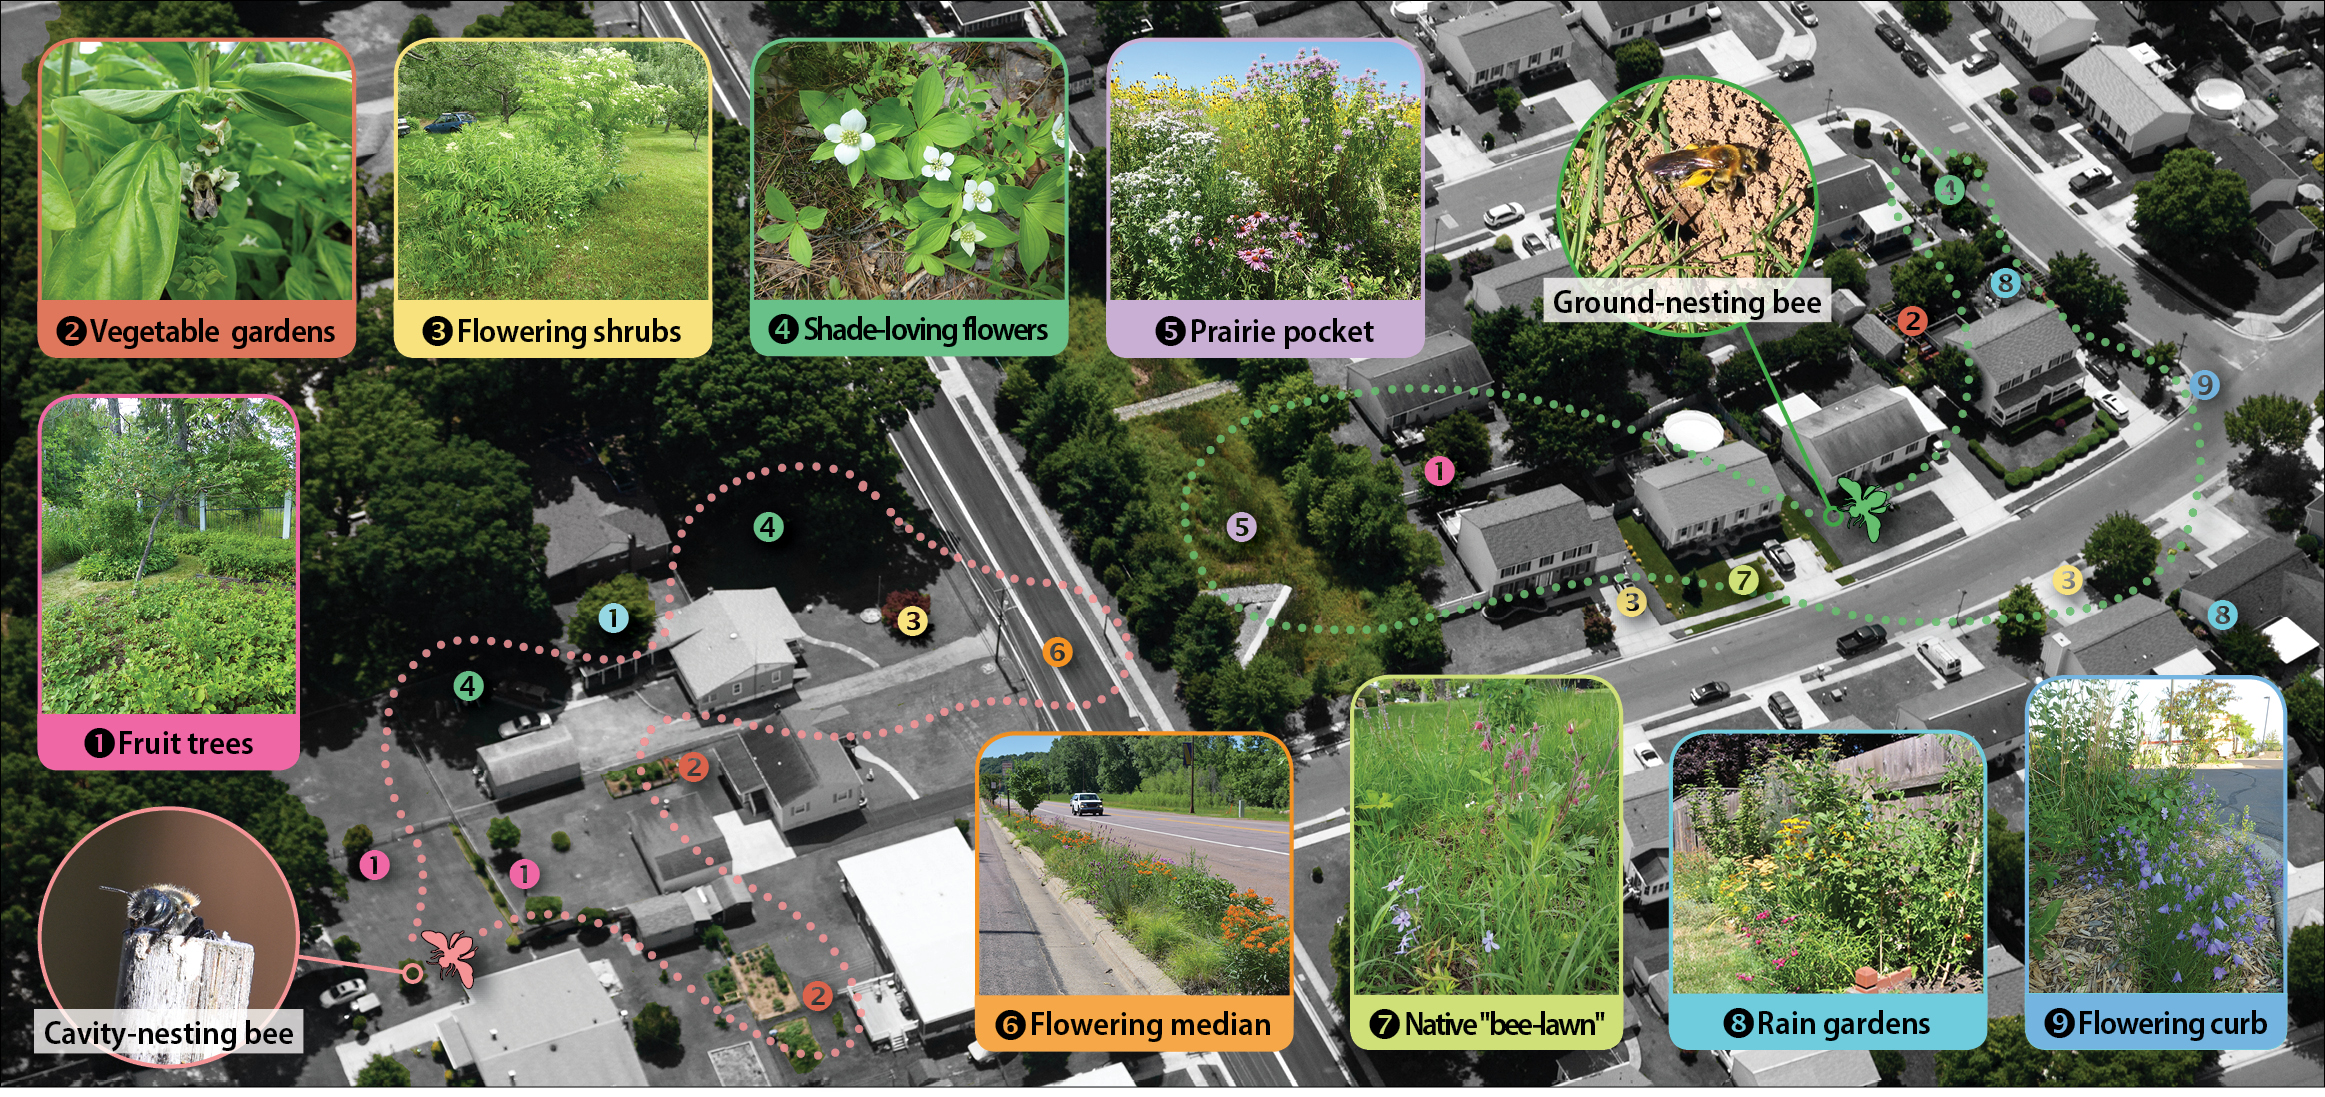 This diagram, superimposed over an aerial image of a housing development, shows the different types of habitat that can exist in yards and other urban areas, including fruit trees, vegetable gardens, flowering shrubs, shad-loving flowers, a "prairie pocket," and loose dirt suitable for ground-nesting bees.